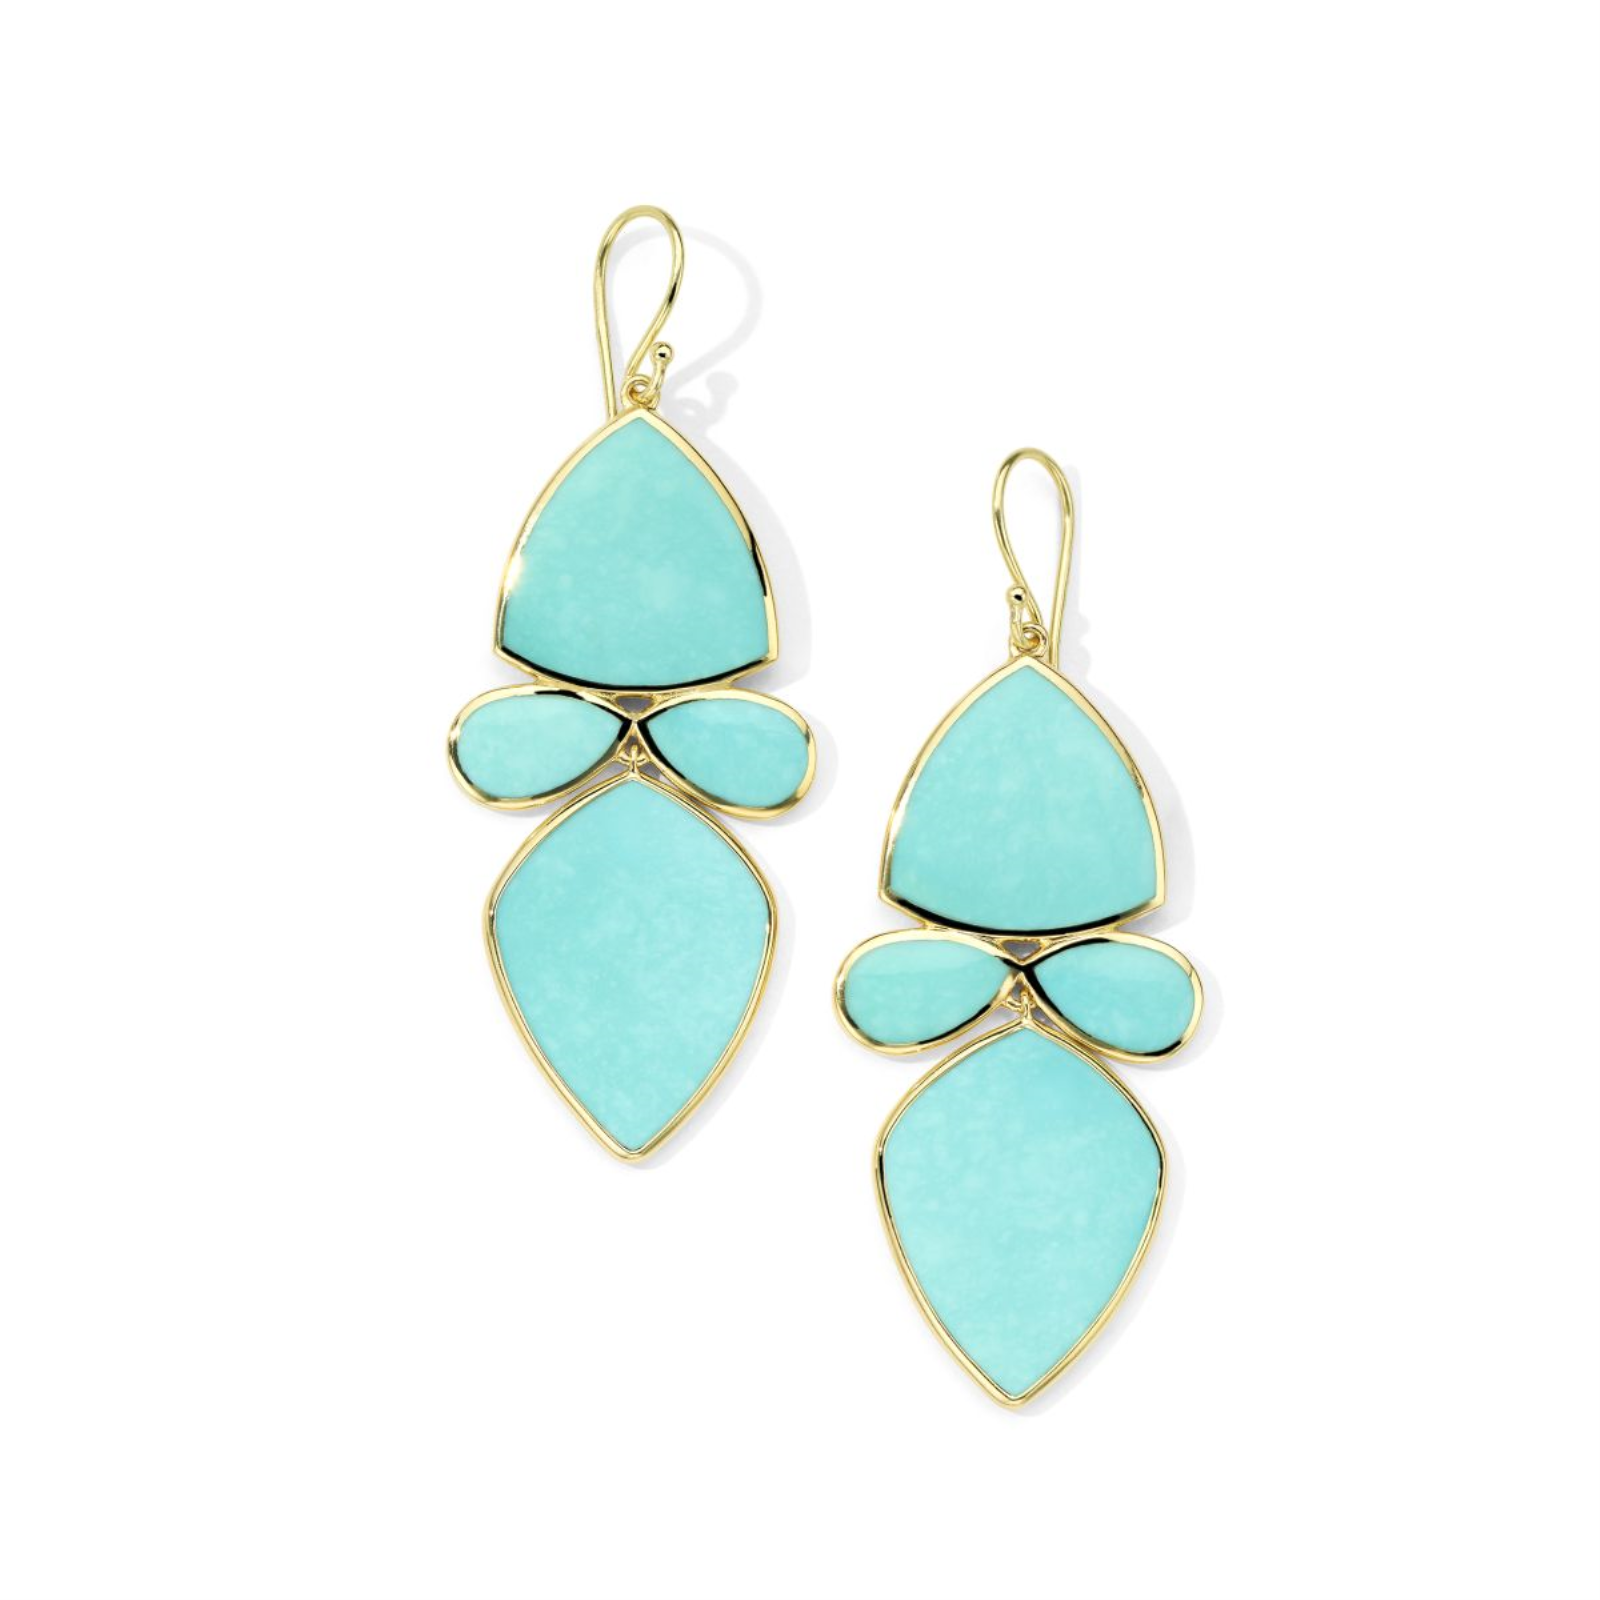 GOLD TURQUOISE MIXED SHAPE DROP EARRINGS